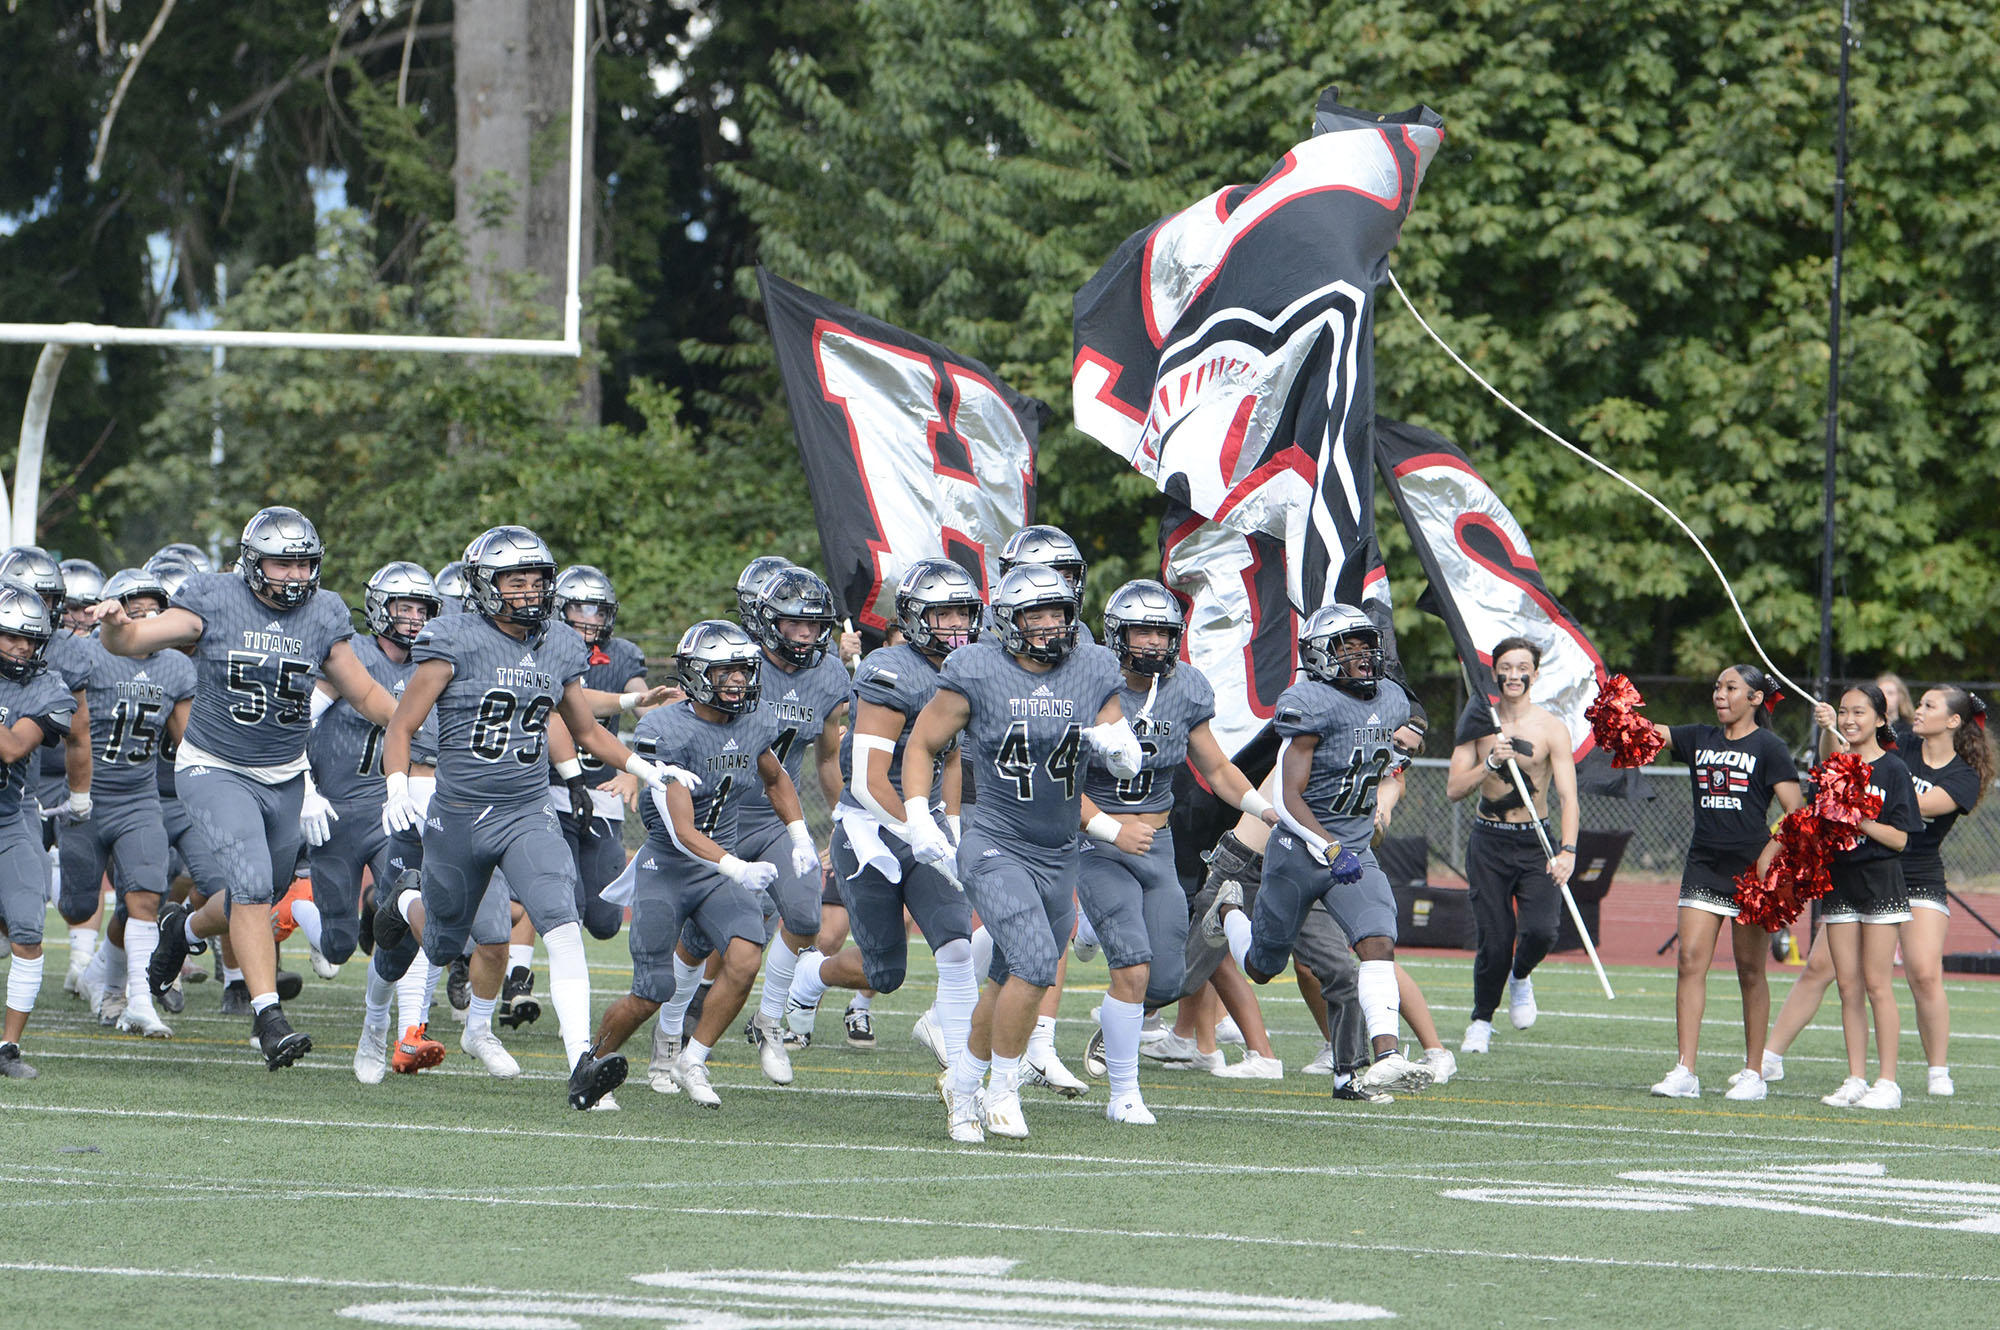 Union players run on to the field prior to the start of Saturday’s season-opening game against Eastlake at McKenzie Stadium in Vancouver (Will Denner/The Columbian)